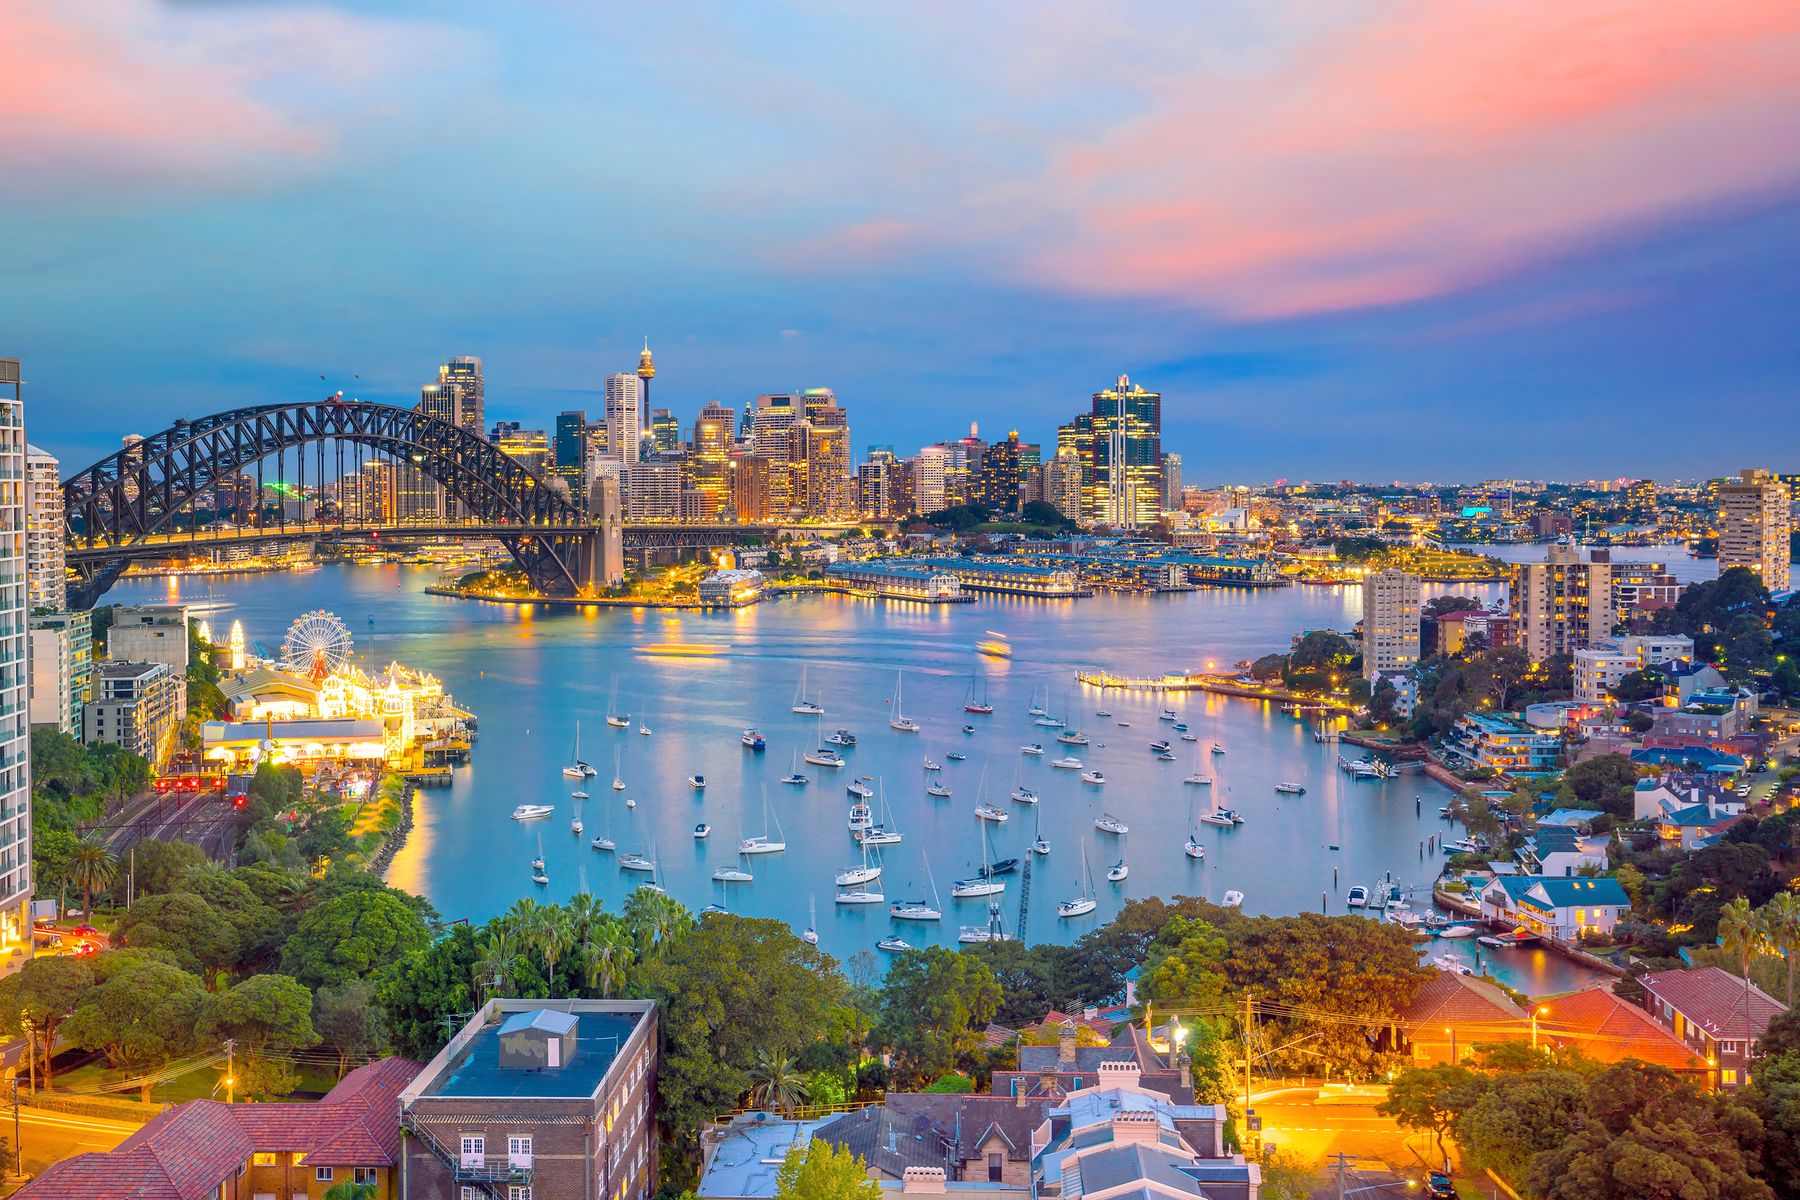 Travel and work in sunny Australia! Image from <a href="https://www.traveldailymedia.com/assets/2020/01/shutterstock_662769598.jpg">here.</a>